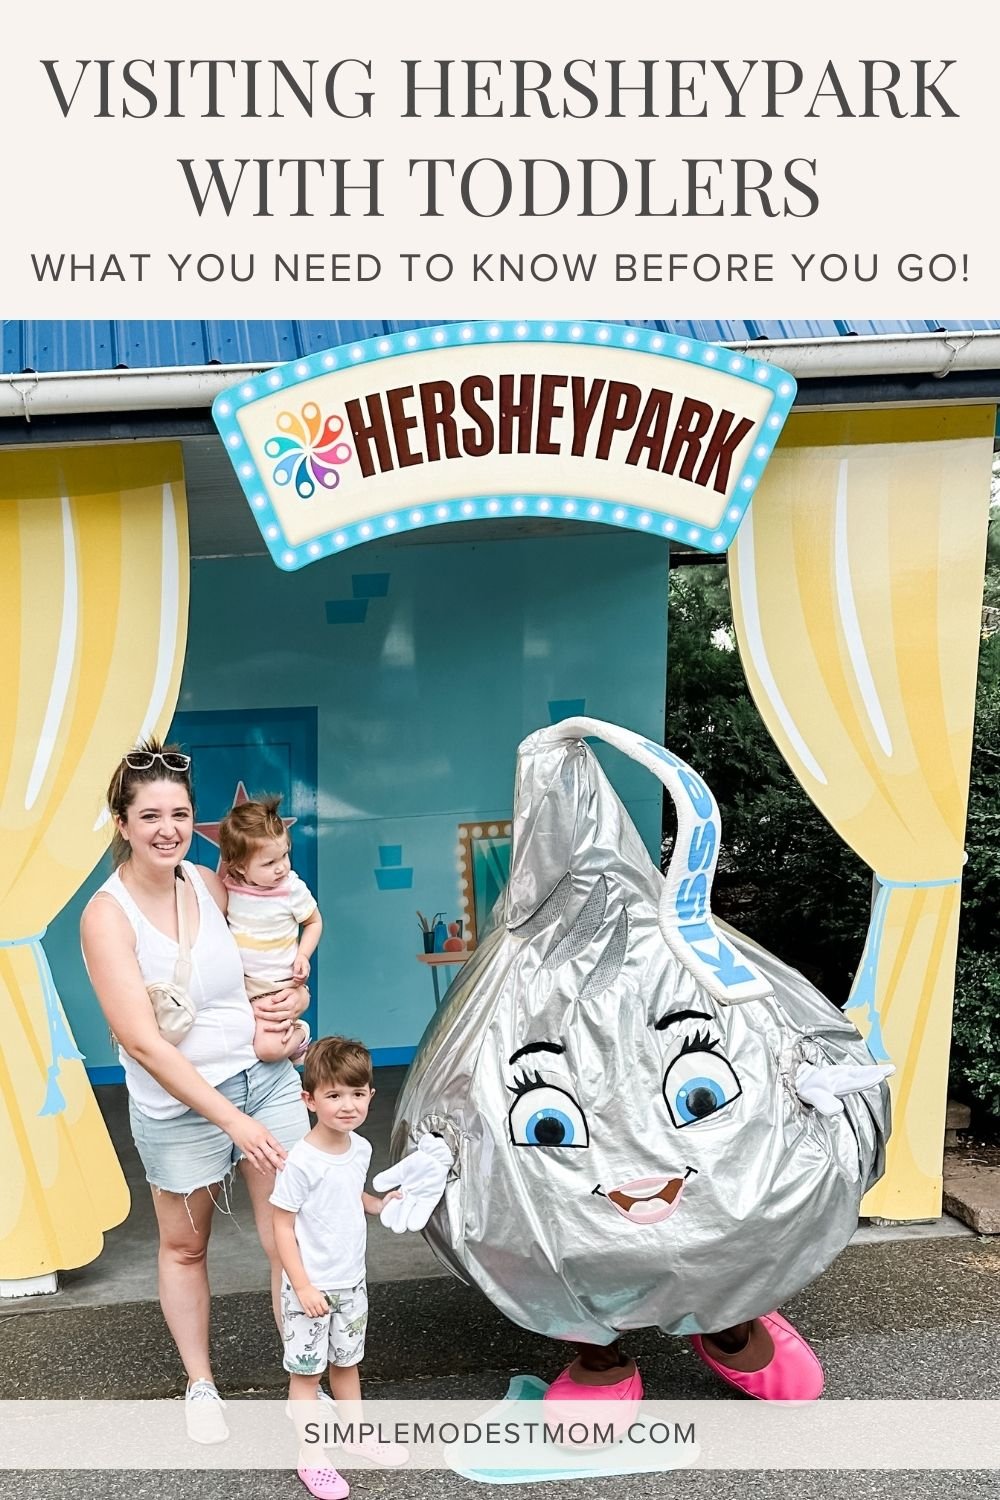 Visiting Hersheypark with Toddlers - What You Need To Know Before You Go.jpg